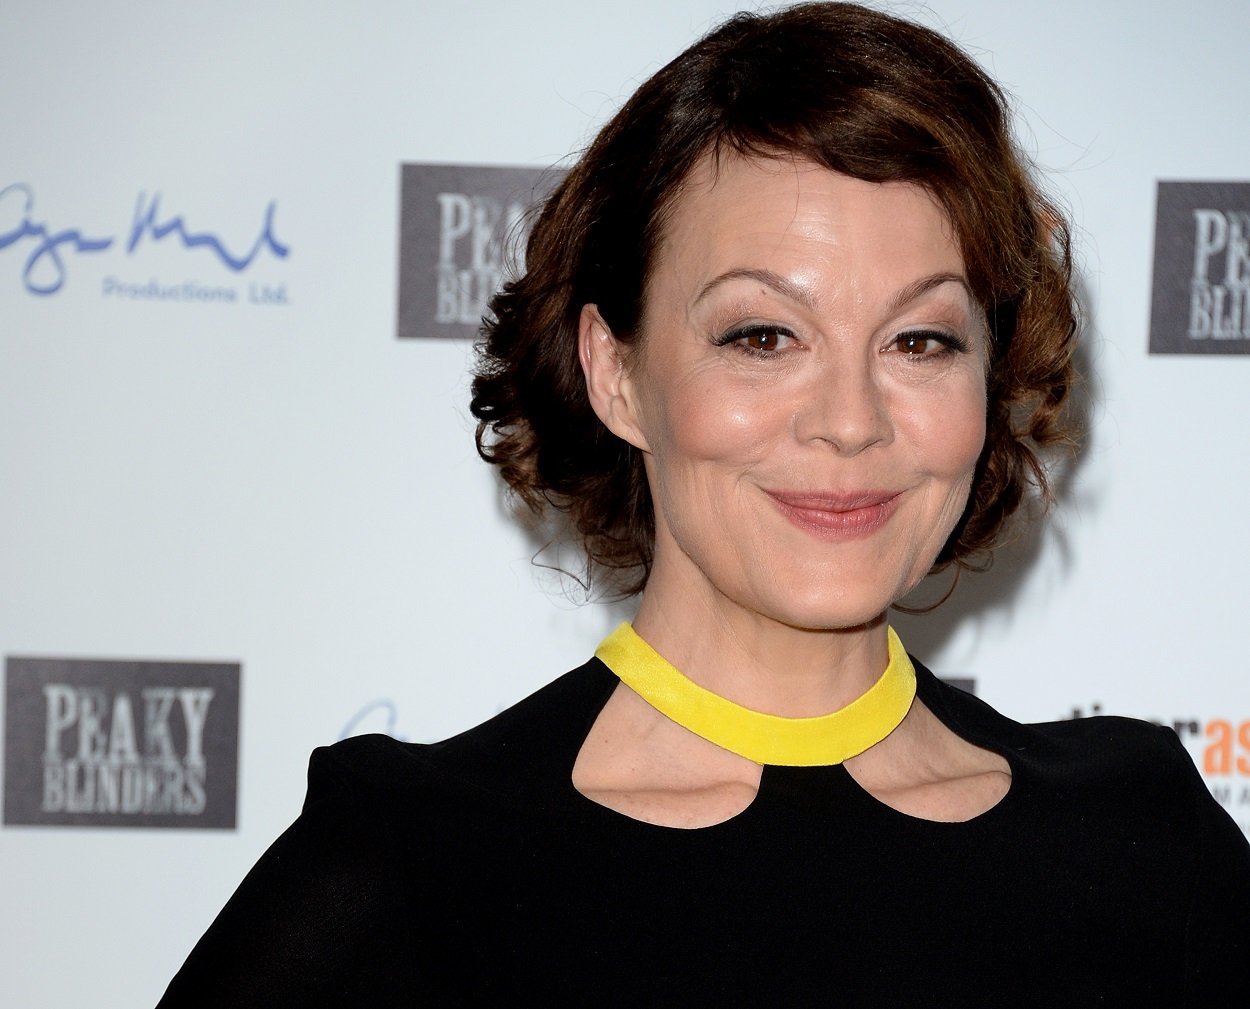 Helen McCrory smiles softly at the camera in a black dress for the Peaky Blinders photo call